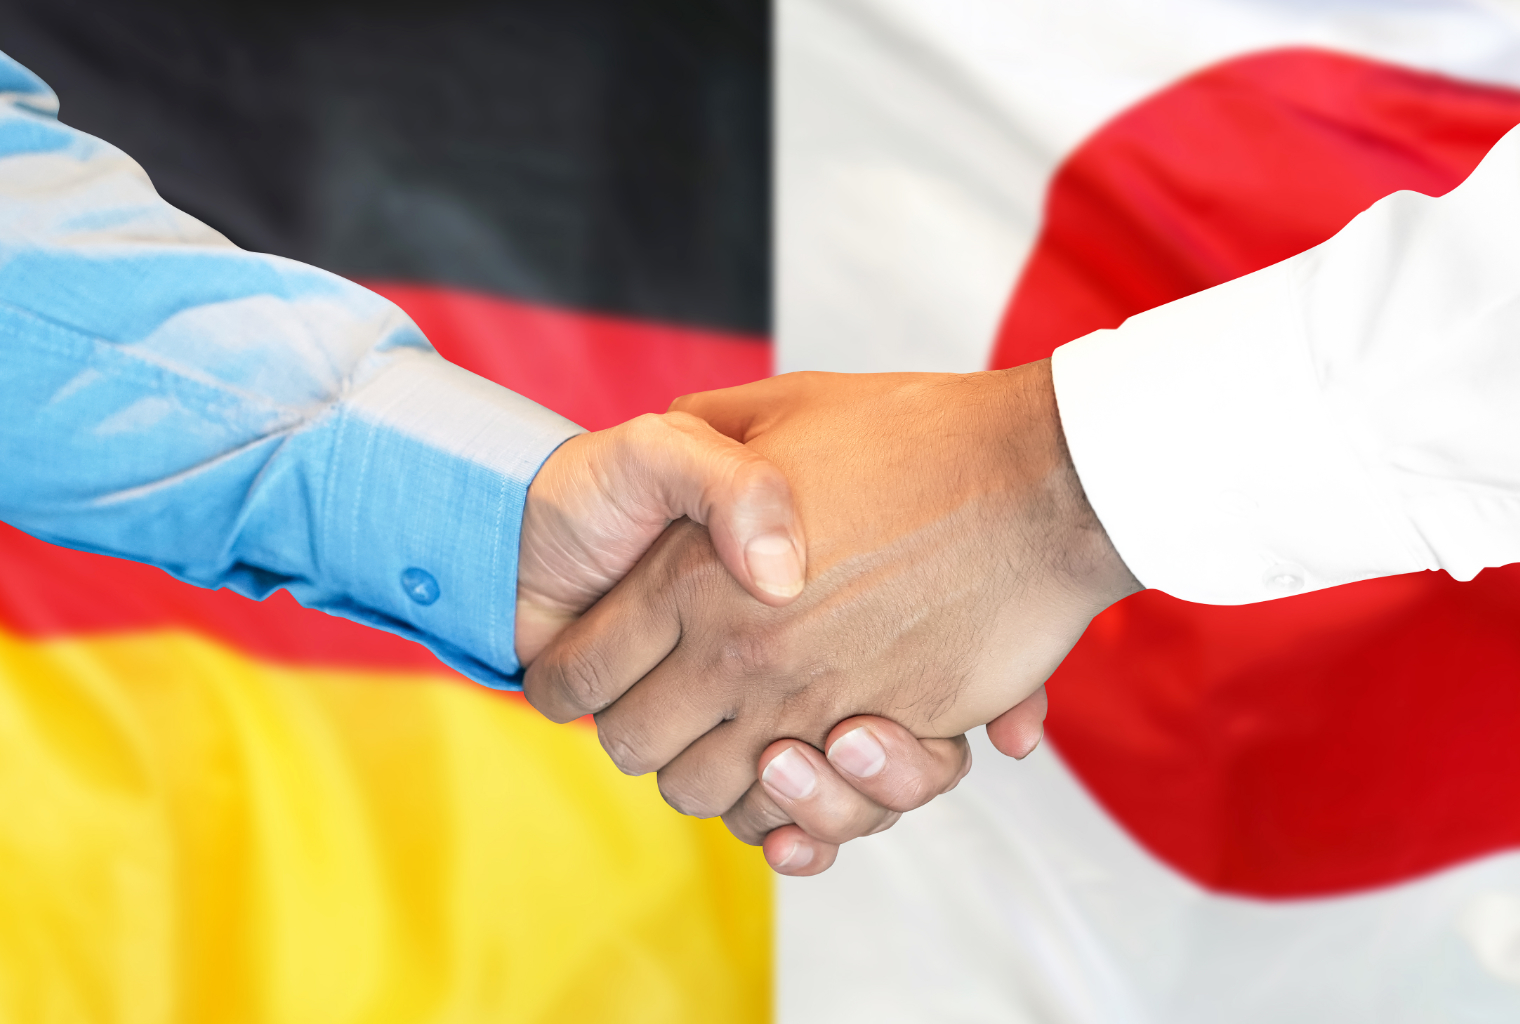 Boerse Stuttgart and SBI Partner to Expand Crypto Services in Europe and Asia